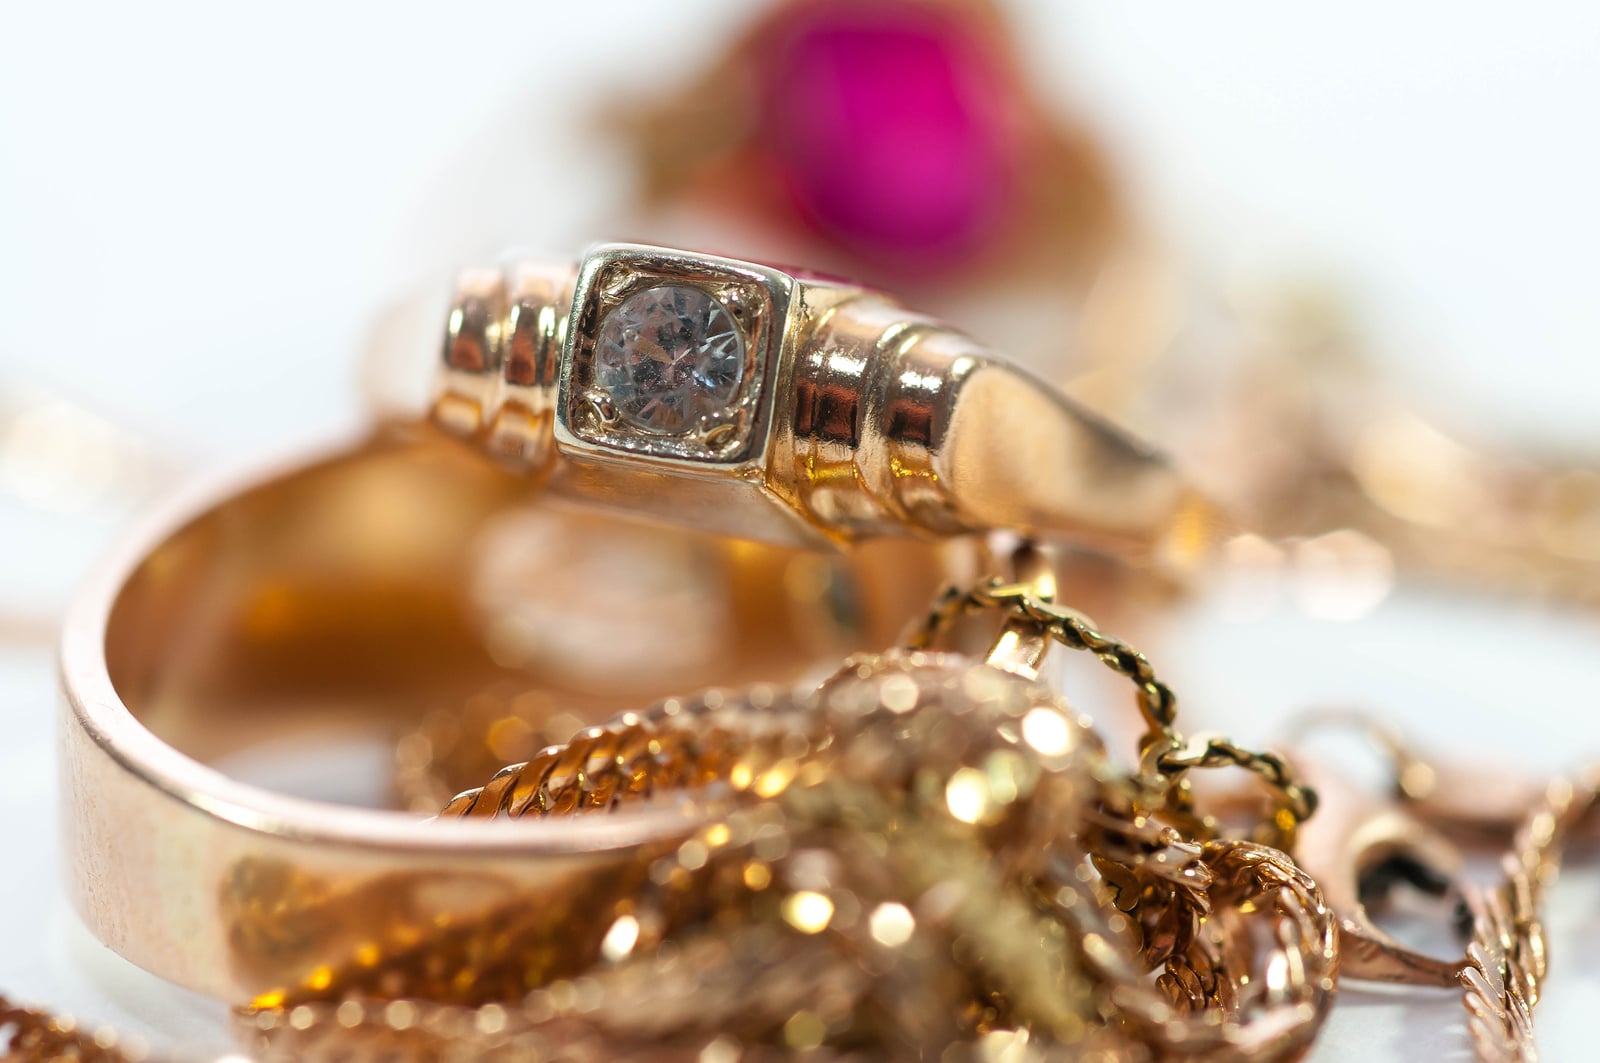 Gold Jewelry  With Gems , Chains Close Up Macro Shot Isolated On